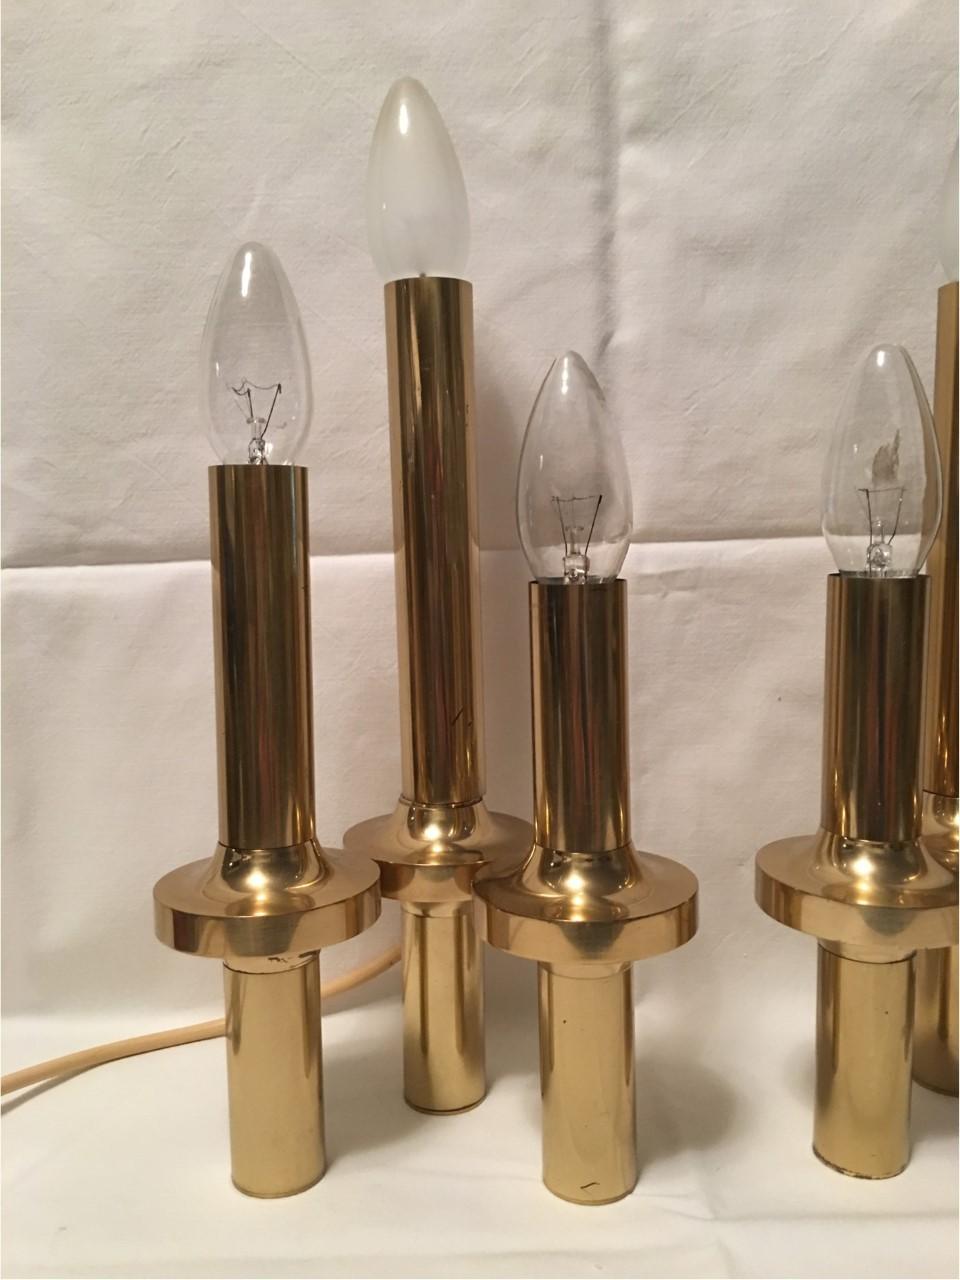 A pair of Italian table lamps made of brass with three lights. In the style of Gaetano Sciolari from the 1970s. Each fixture requires three European E14 candelabra bulbs, each bulb up to 40 watts. In good working condition. Equipped with original